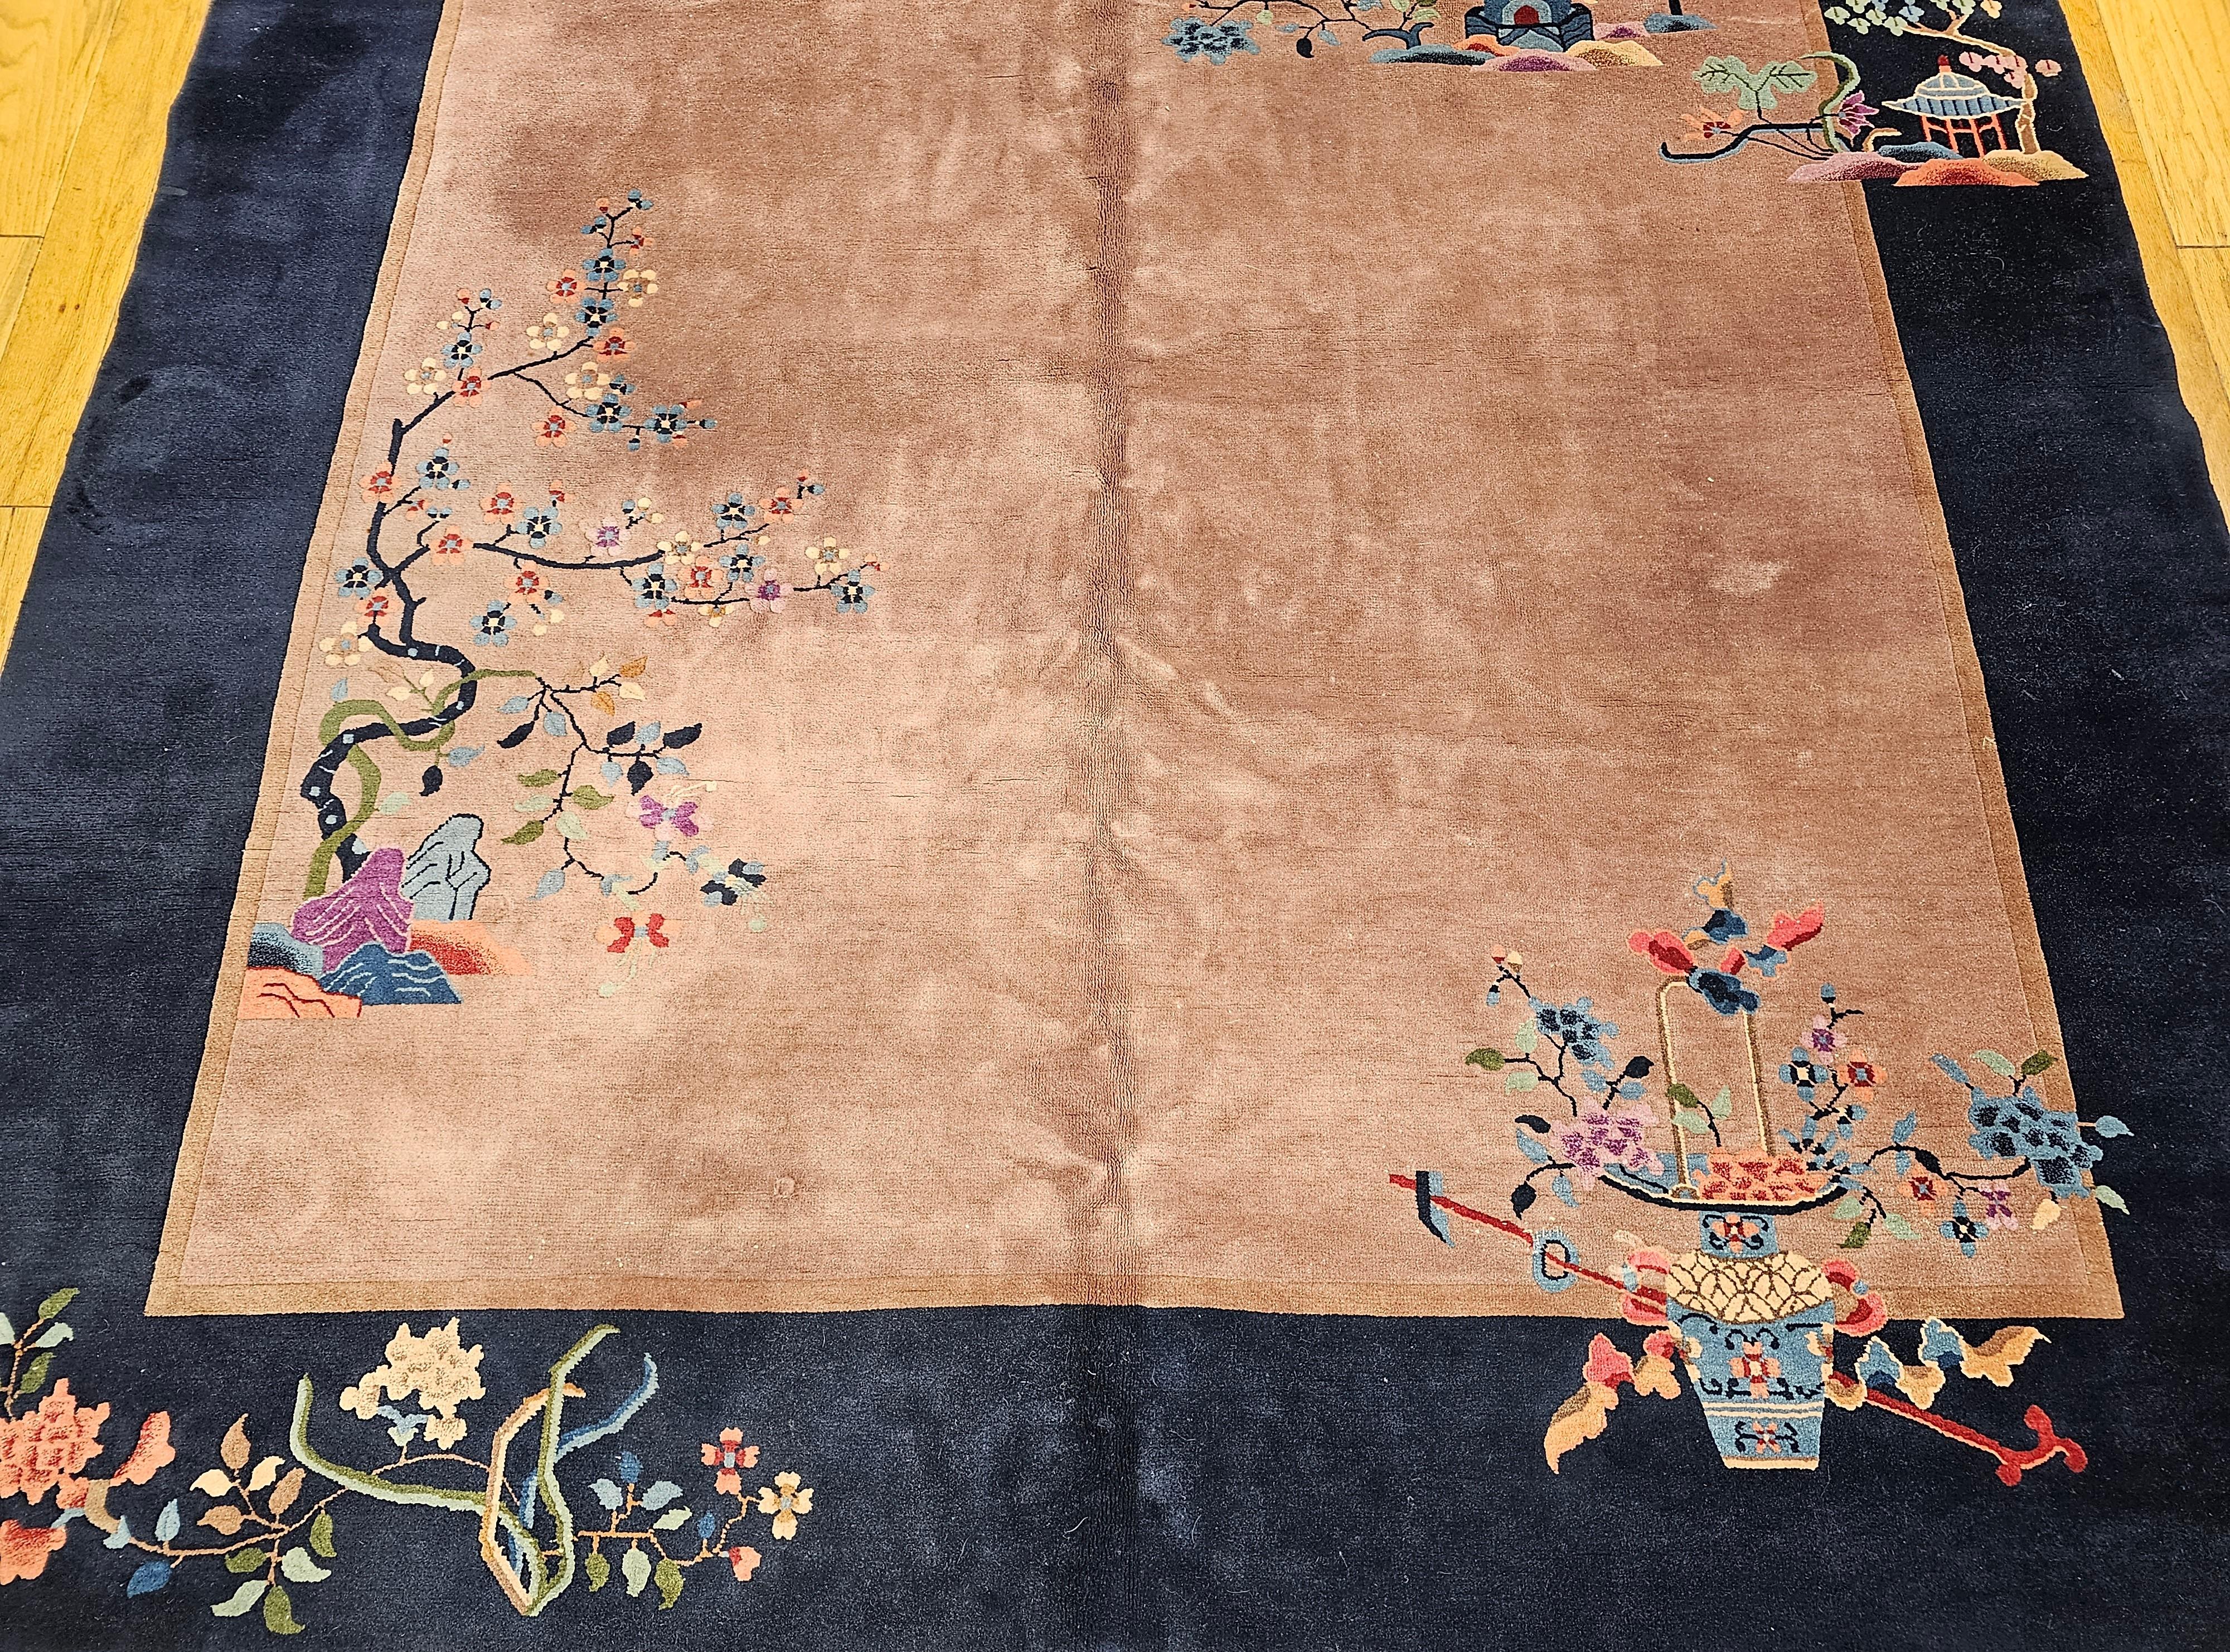 Hand-Knotted Vintage Art Deco Chinese Nichols Rug in Eggplant, Navy, Blue, Green, Pink For Sale